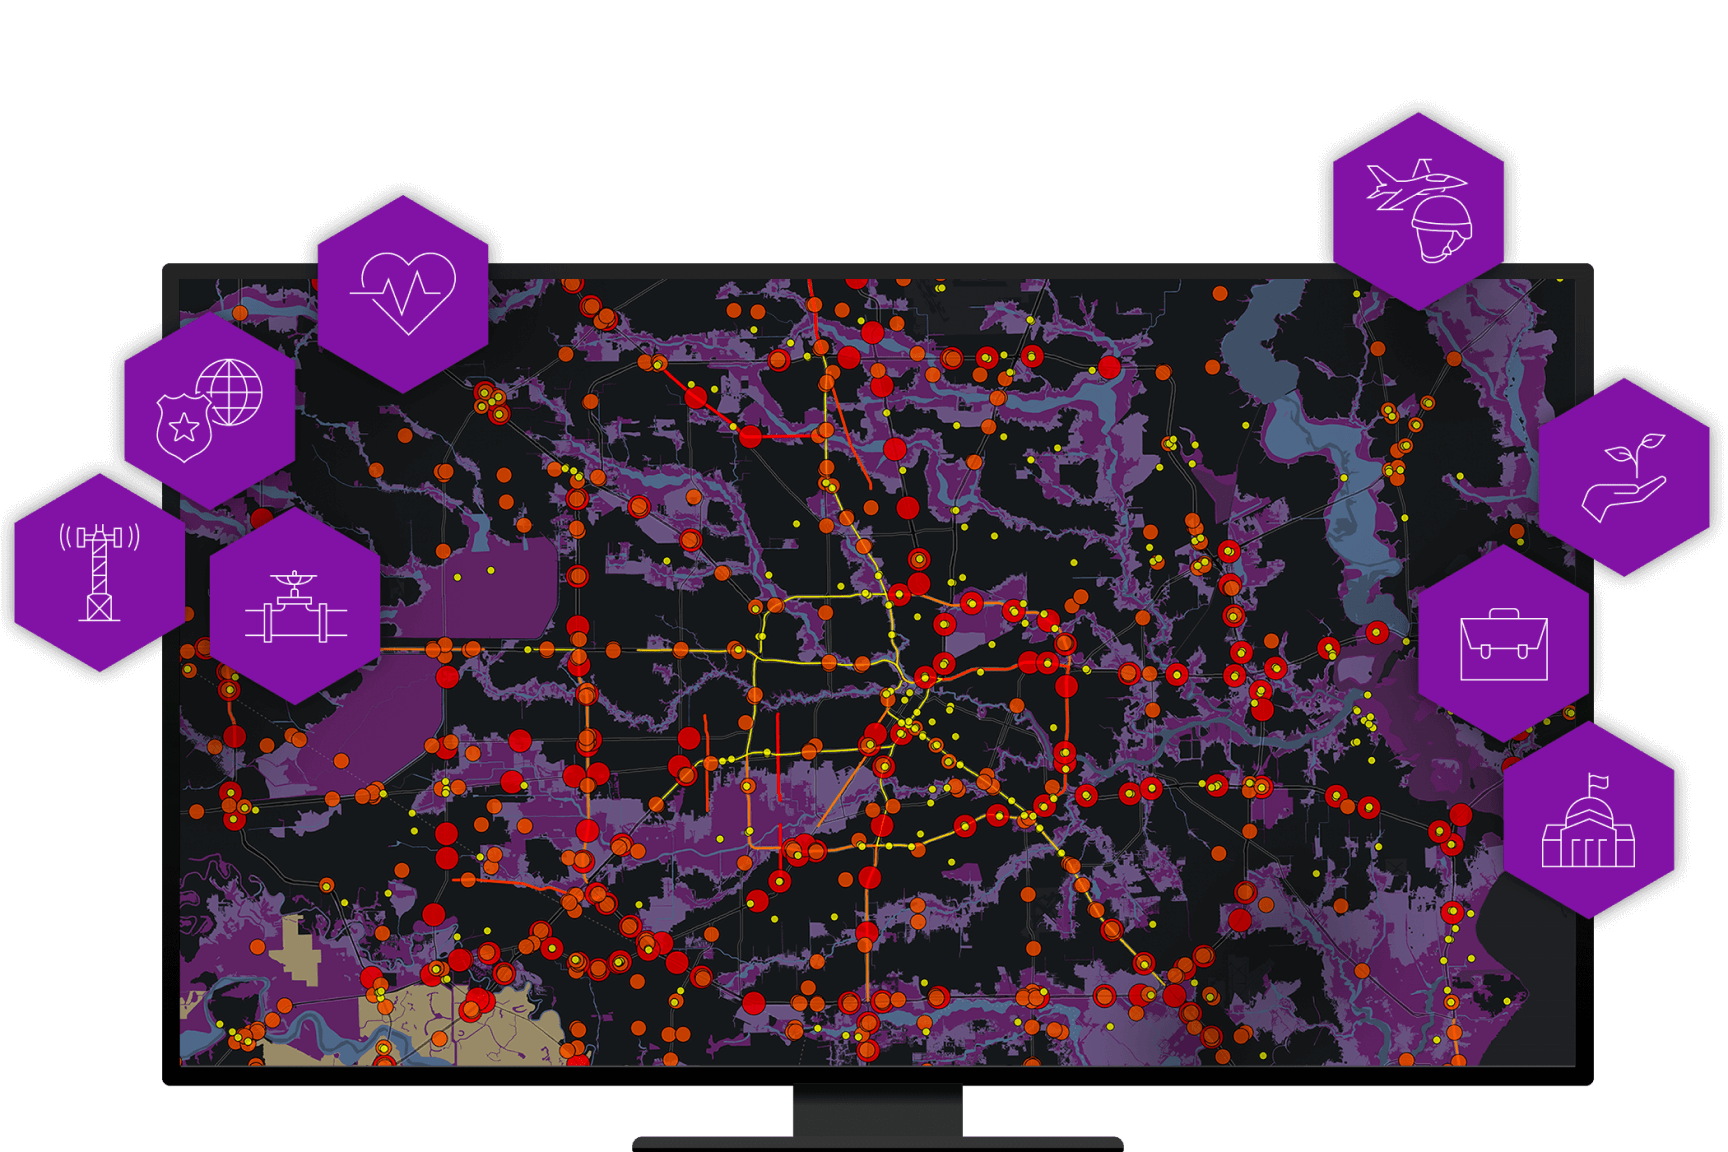 A computer desktop monitor displaying a purple and black map with many dispersed red dots